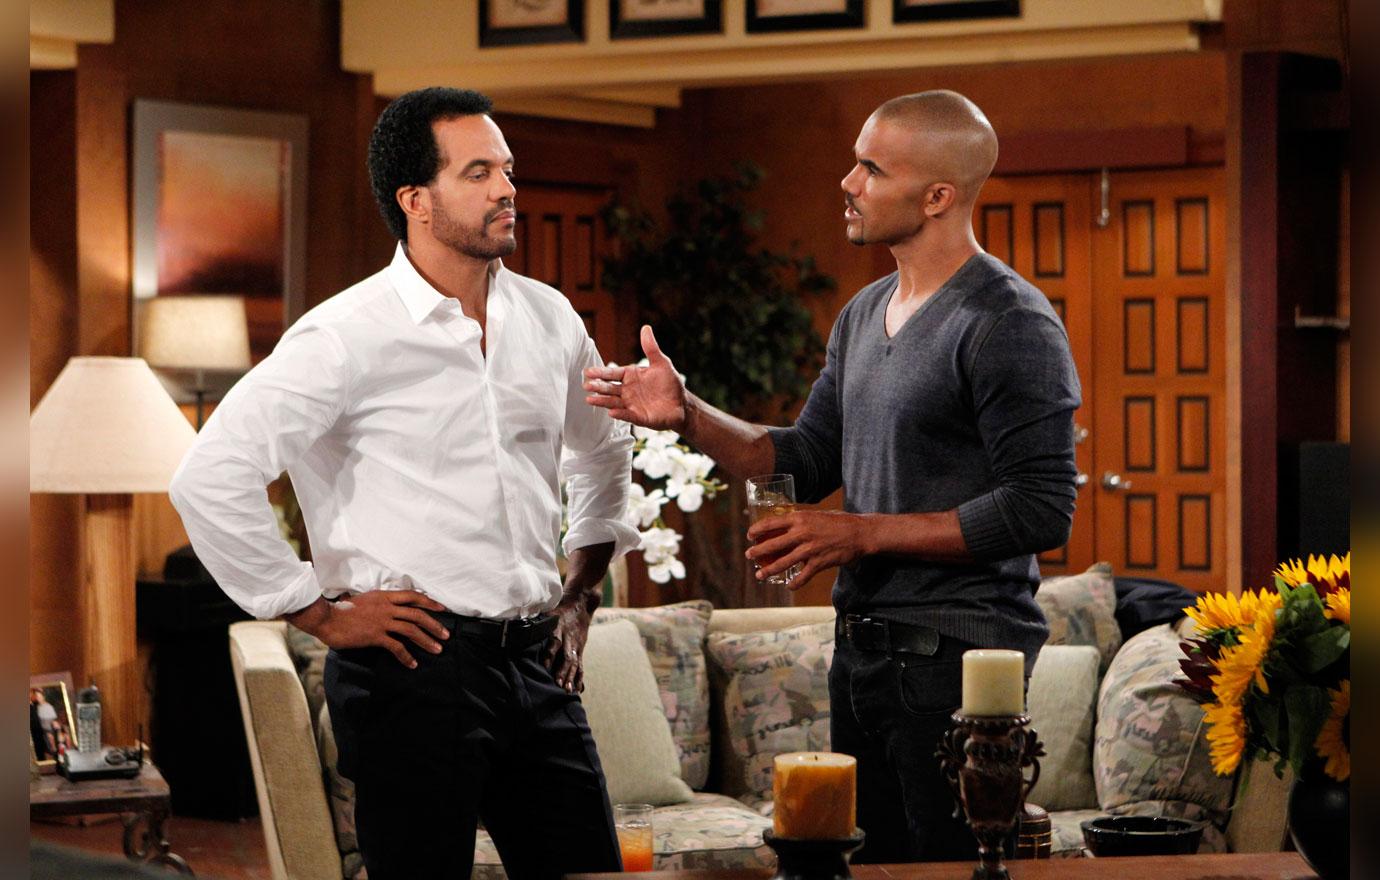 Y&R Neil and Malcolm about to handshake scene.